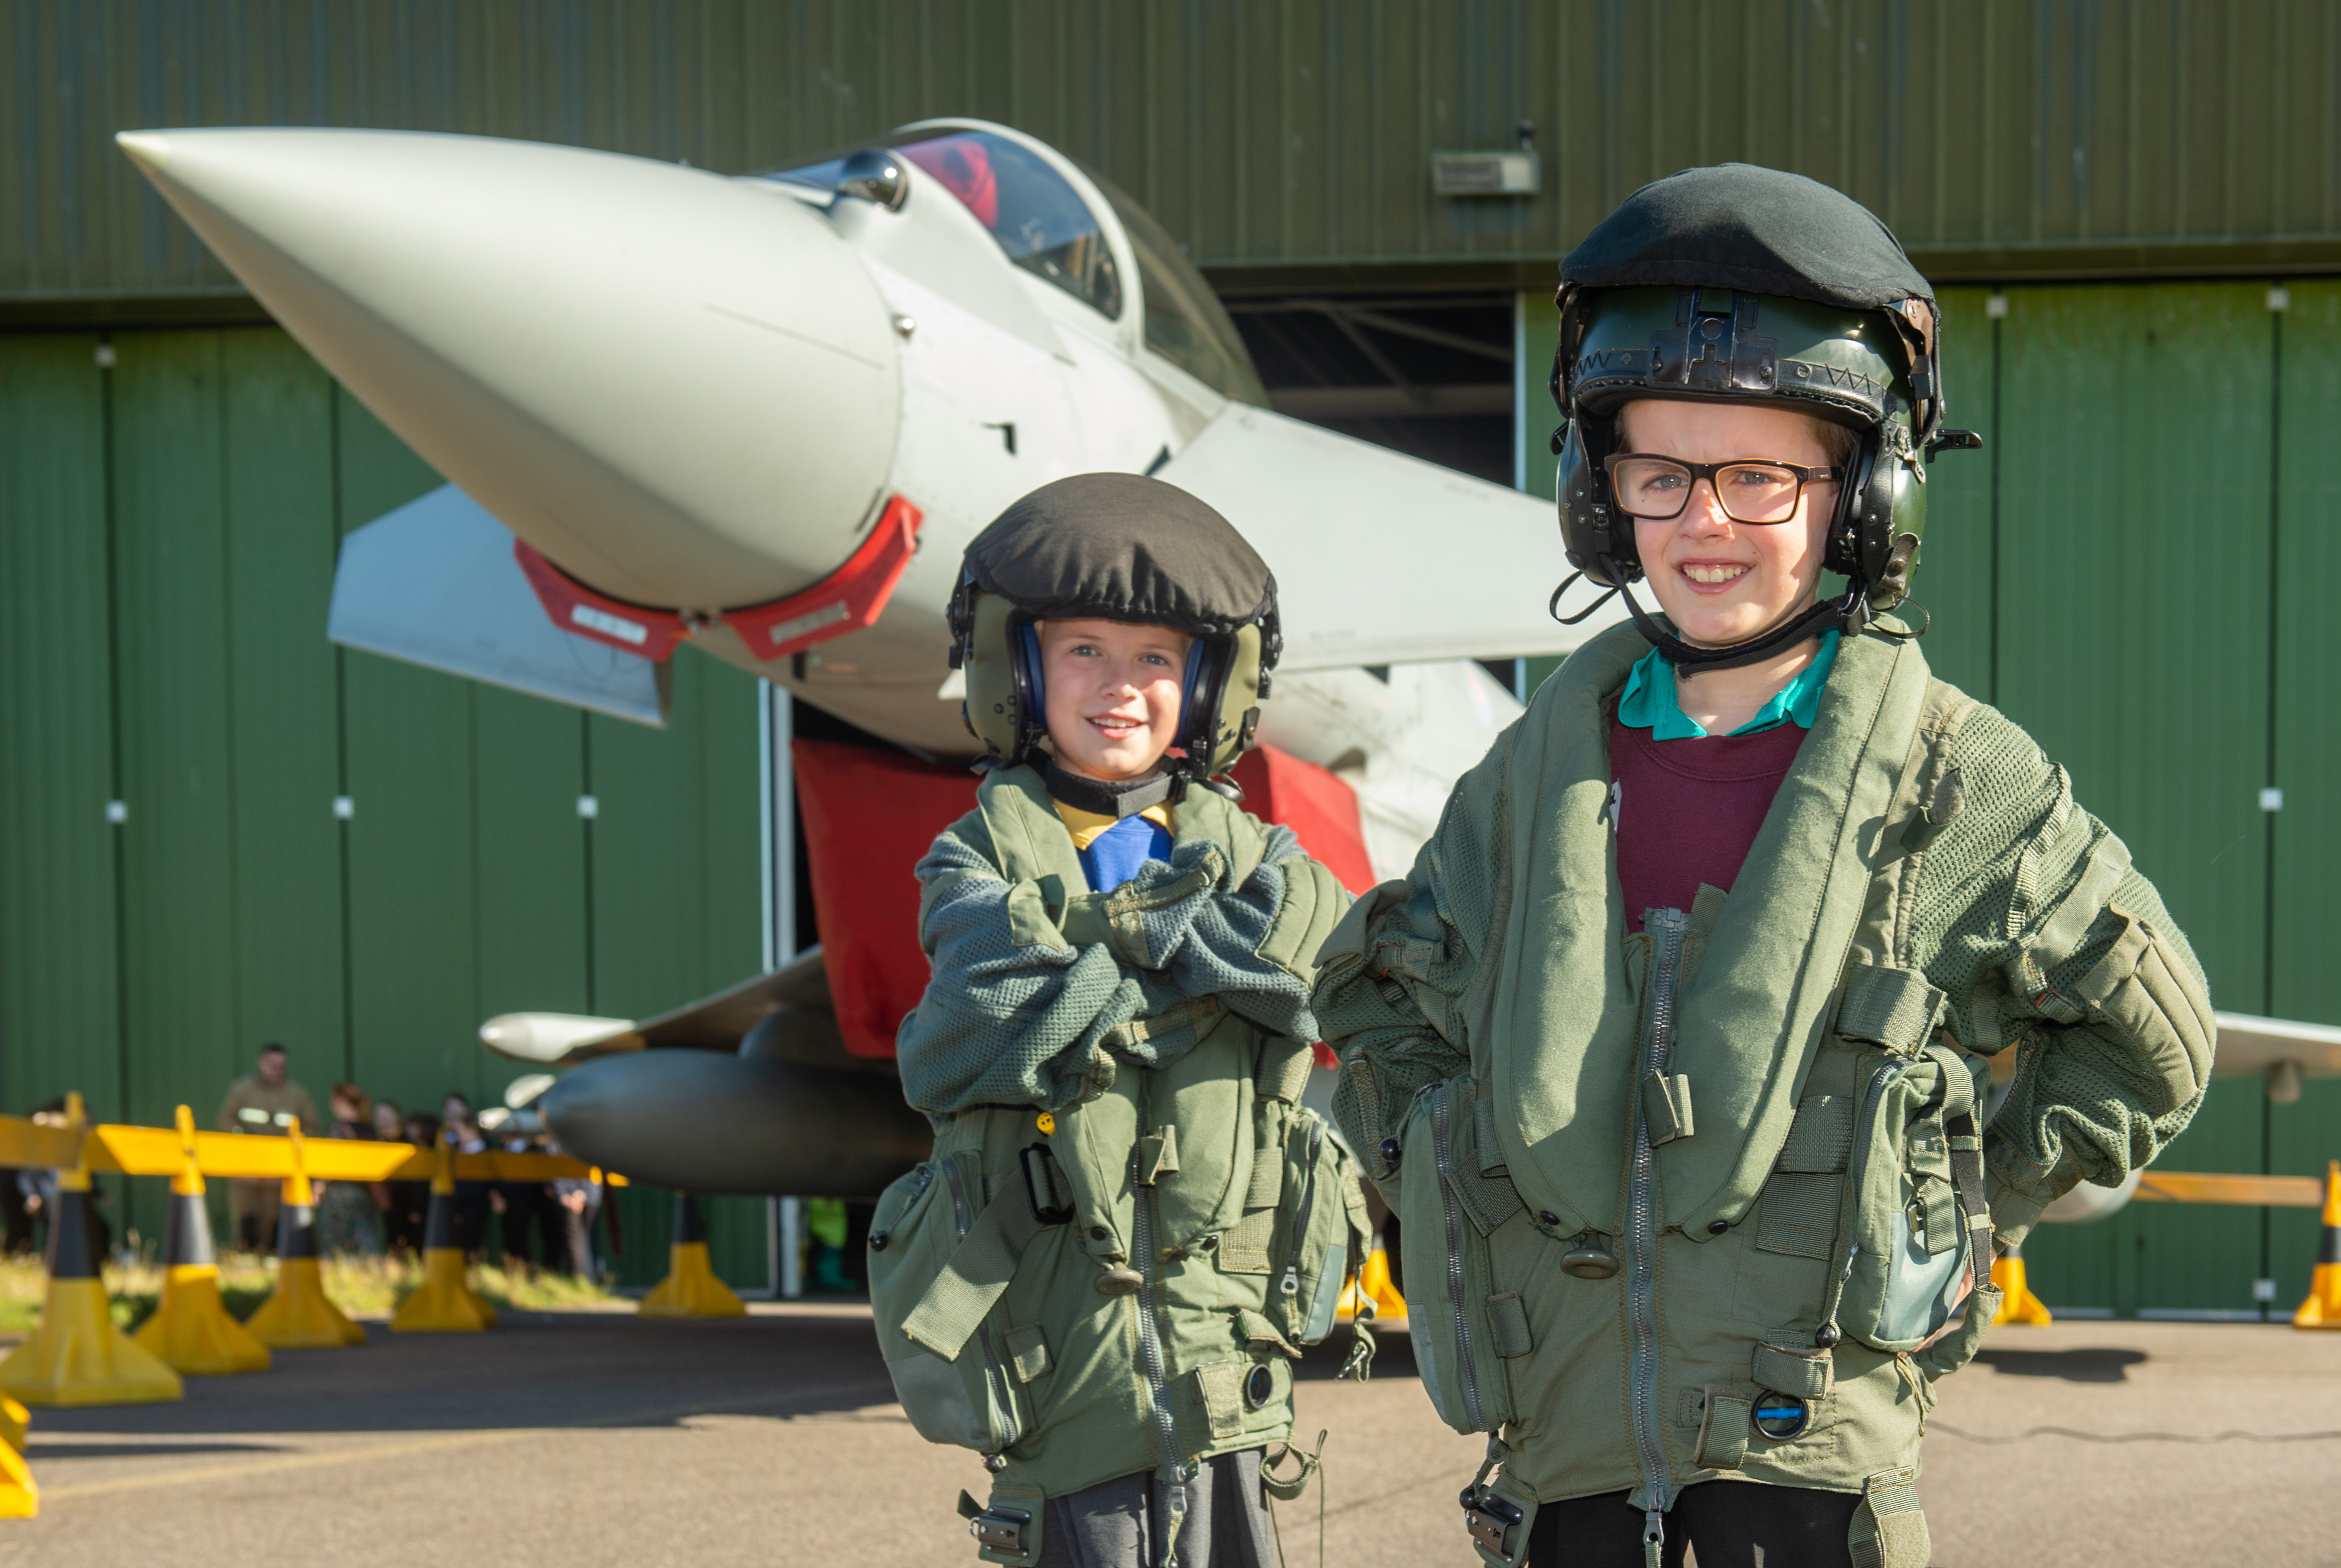 RAF Lossiemouth host an event for primary school pupils to showcase how science and technology subjects can apply to jobs Children take part in activities at the base to learn how the subjects apply to roles.
Picture: Abigail Campbell from Cullen Primary and David Wallace from Dallas Primary